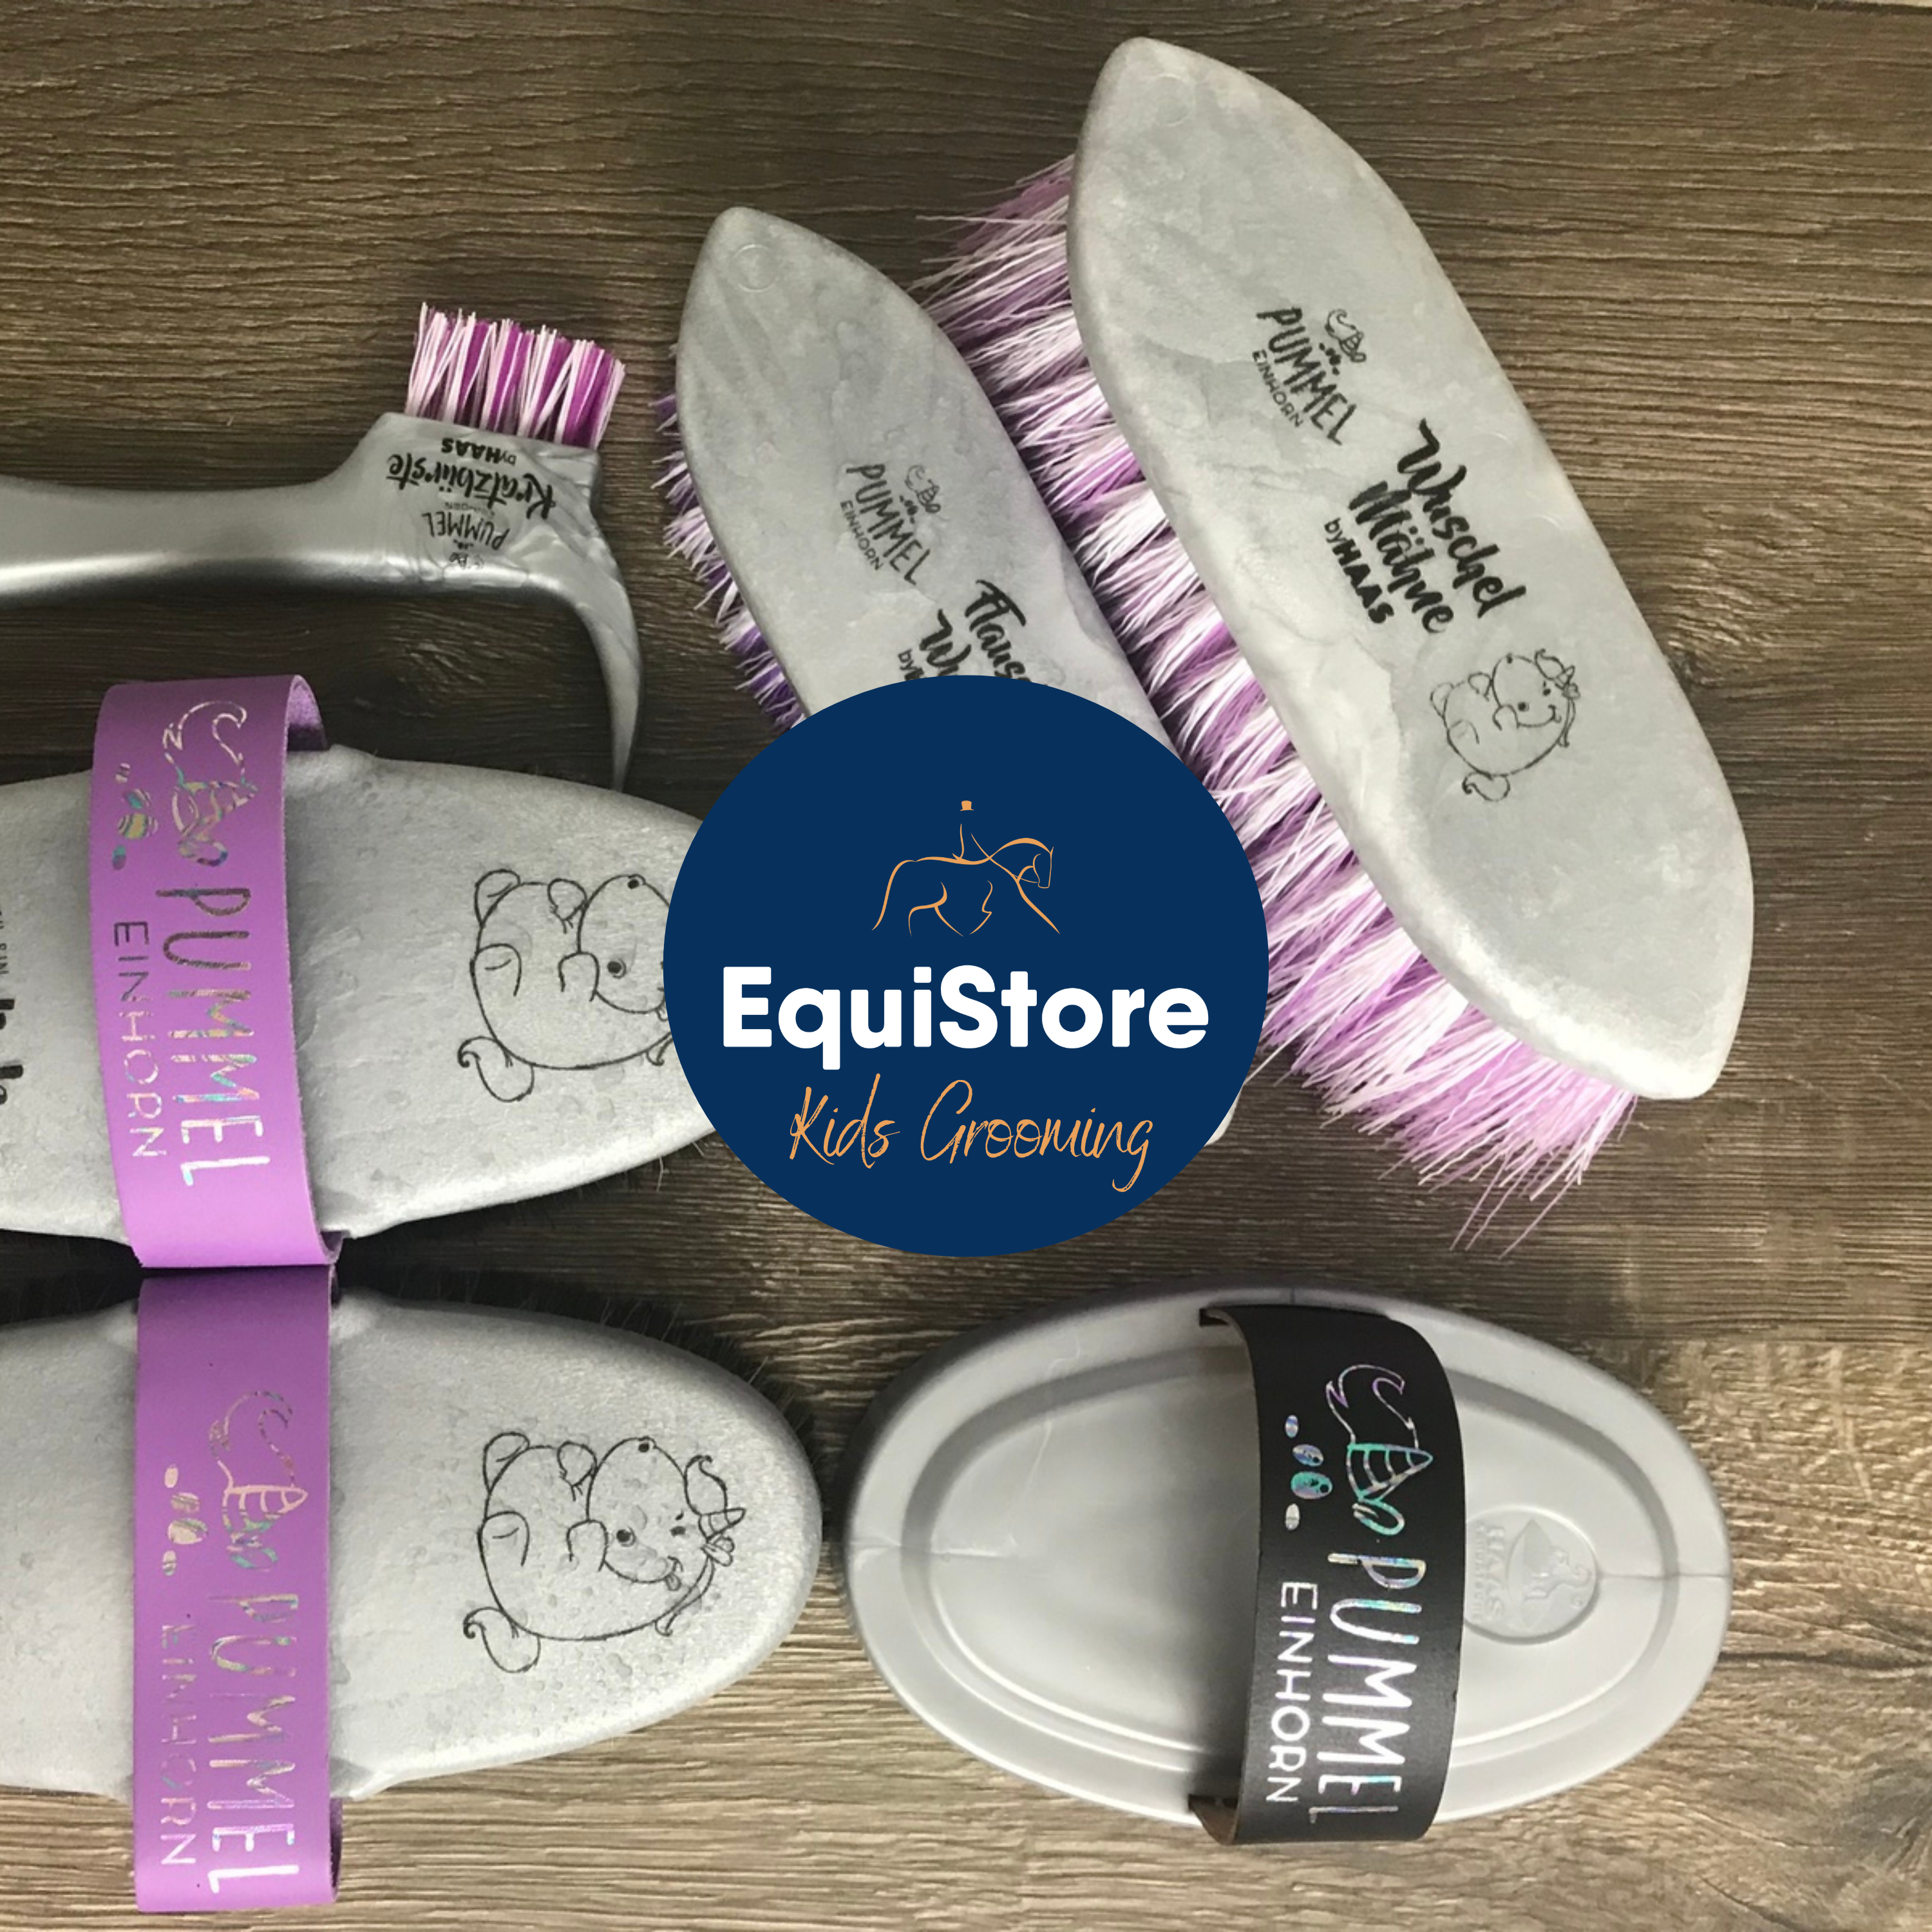 Horse grooming brushes in child sizes, for easier grooming of your childs pony.